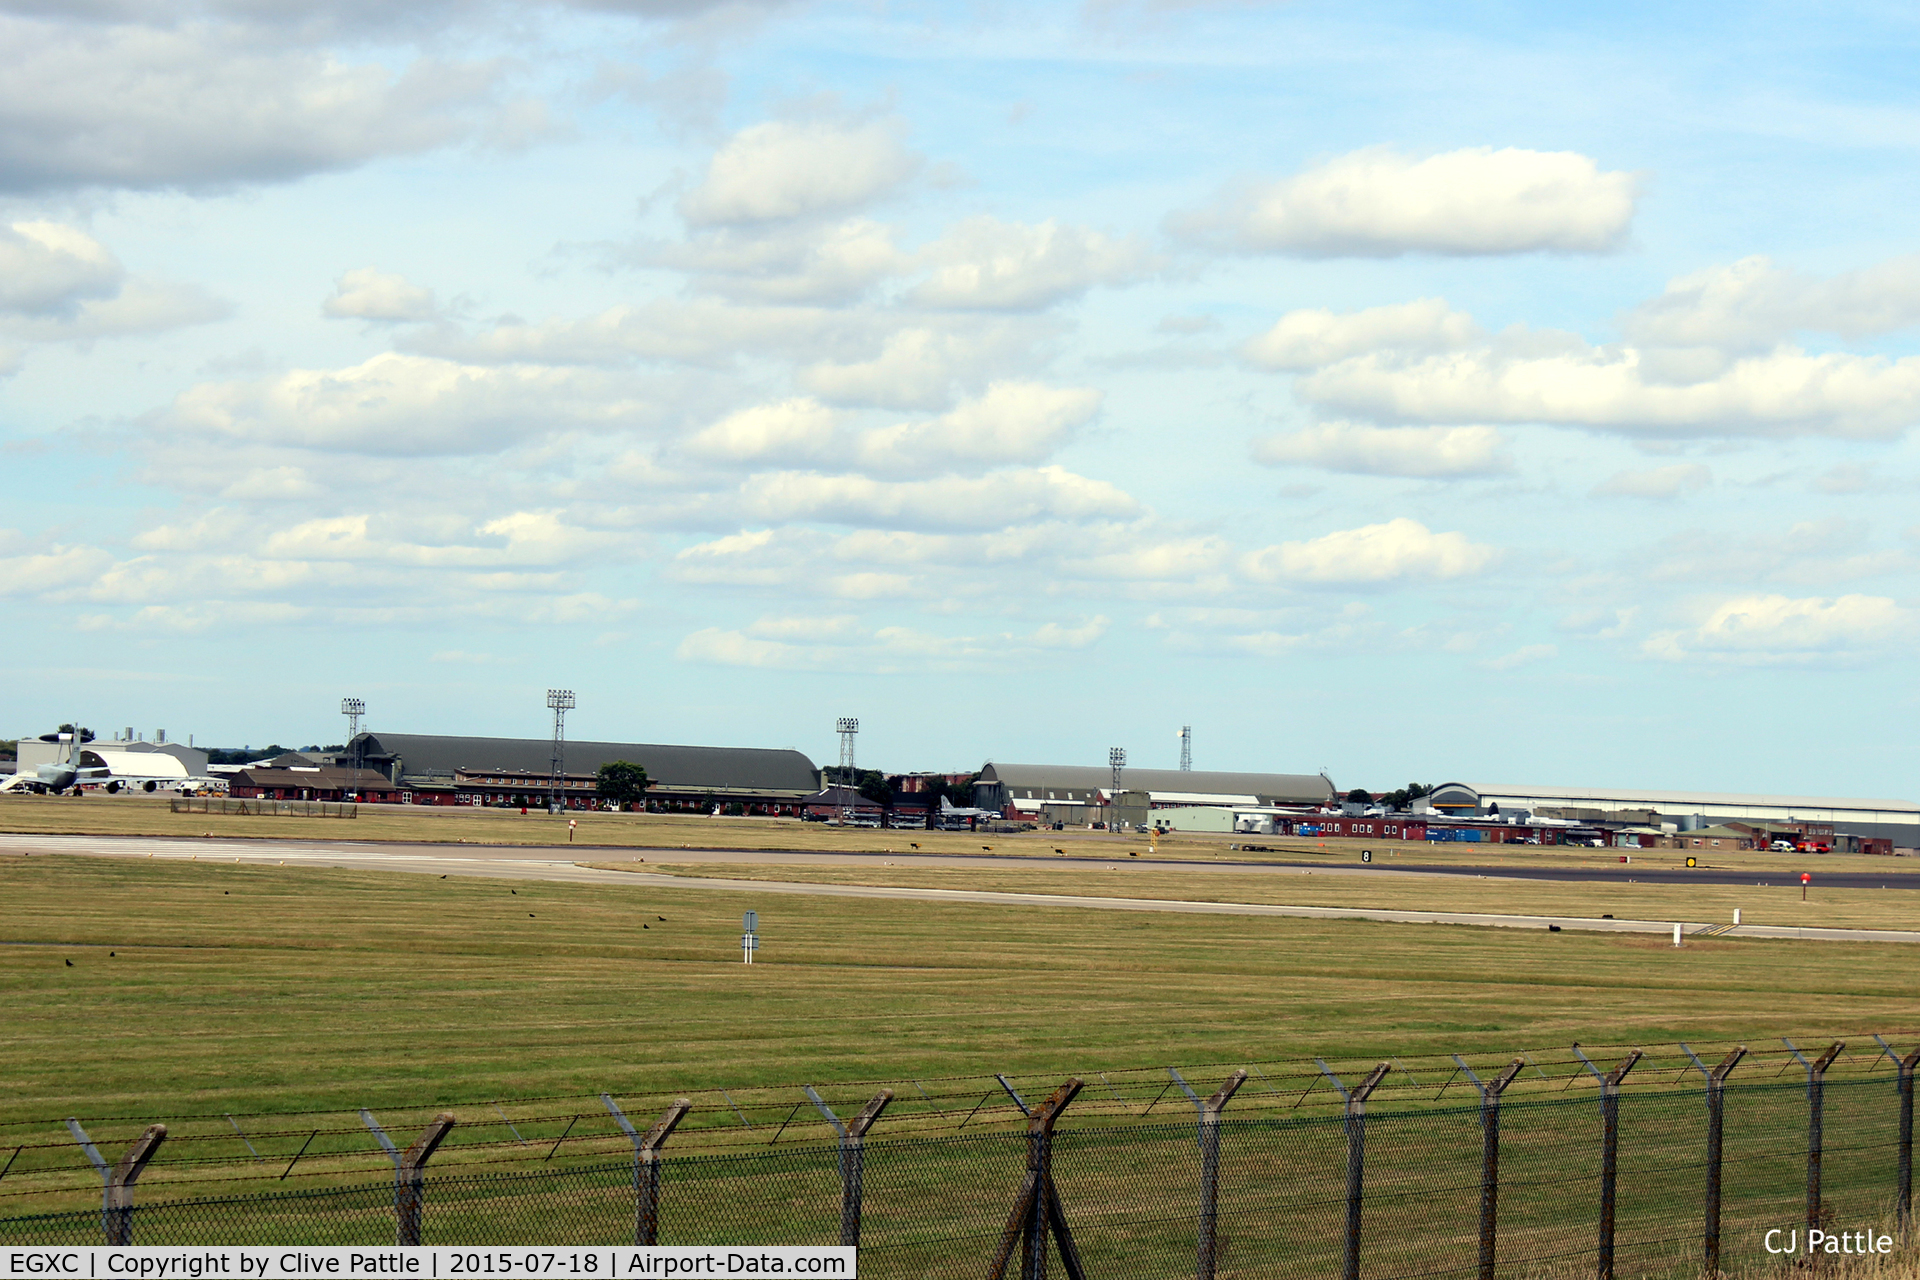 RAF Coningsby Airport, Coningsby, England United Kingdom (EGXC) - Airfield view RAF Coningsby EGXC - viewed from the south side, the 29 (R) Sqn hangar and buildings. The 'Gate Guard' English Electric Lightning can be seen mid image. 